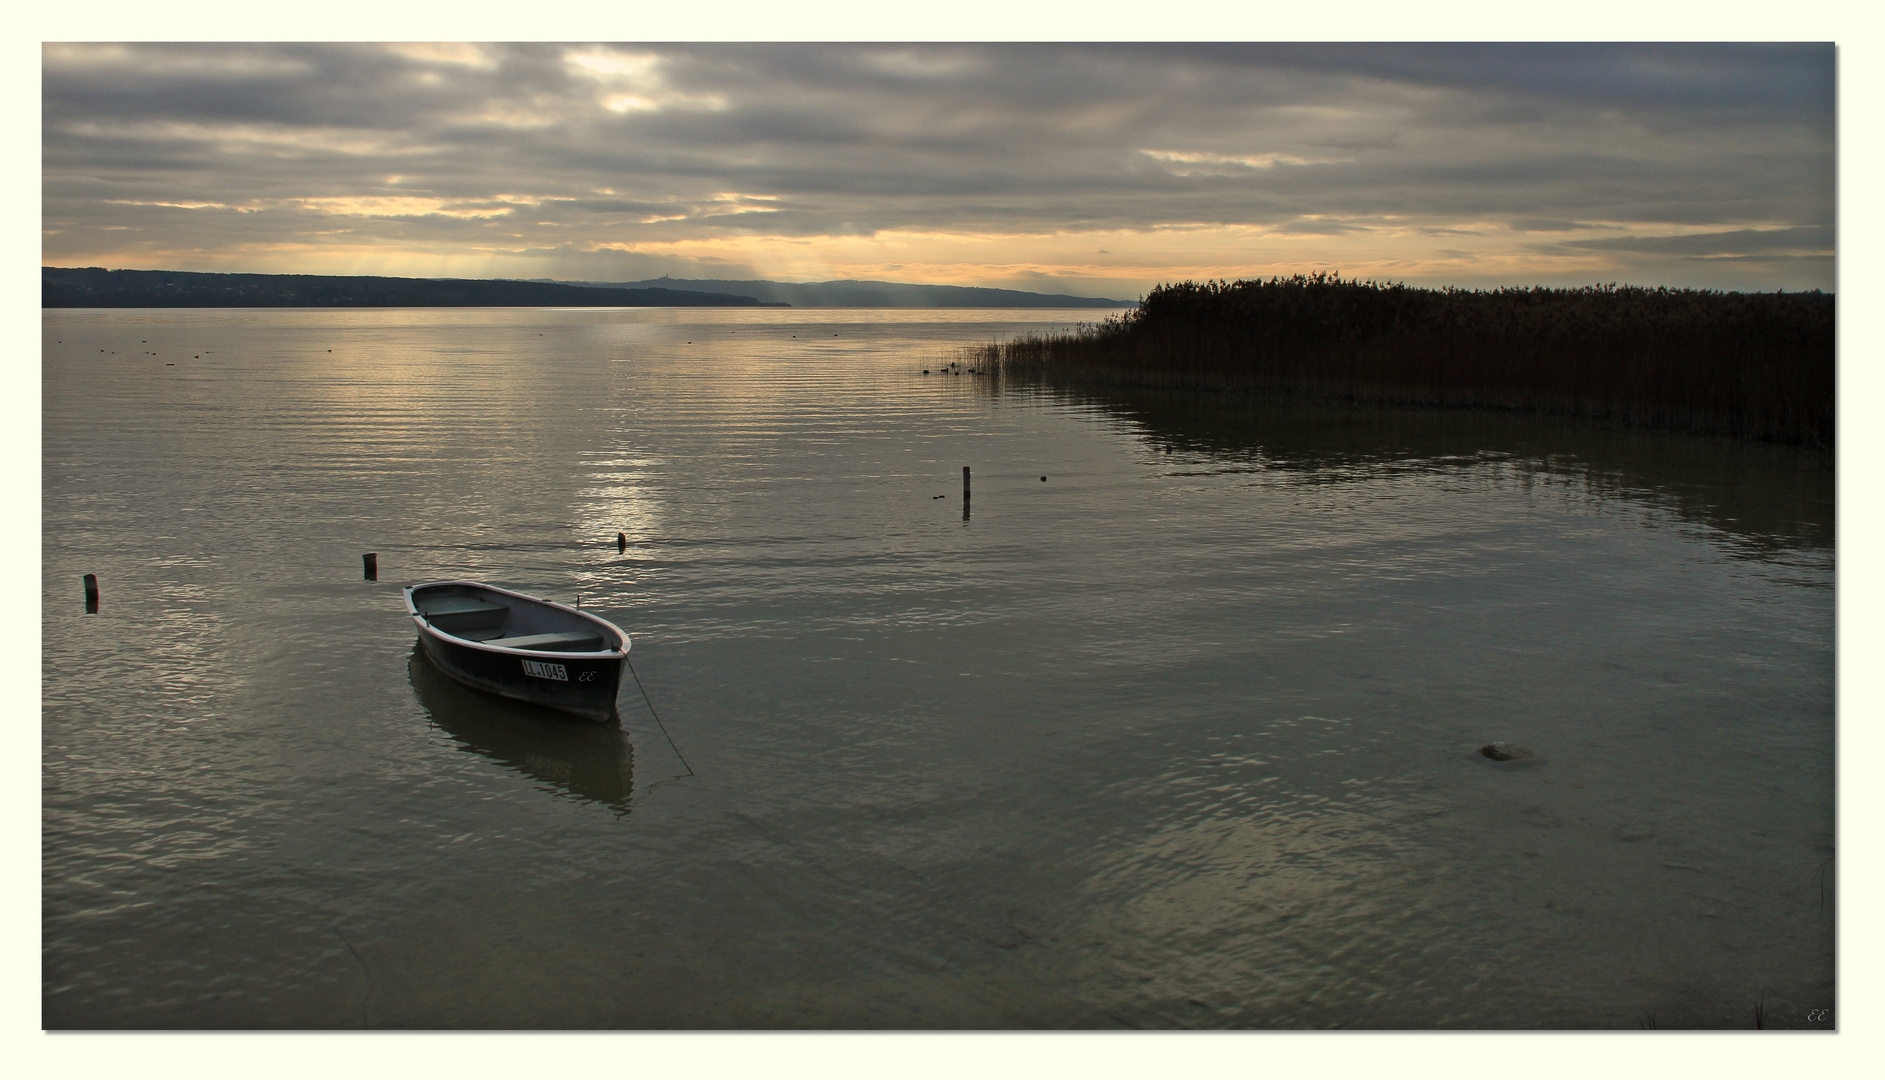 Vormittags am Ammersee